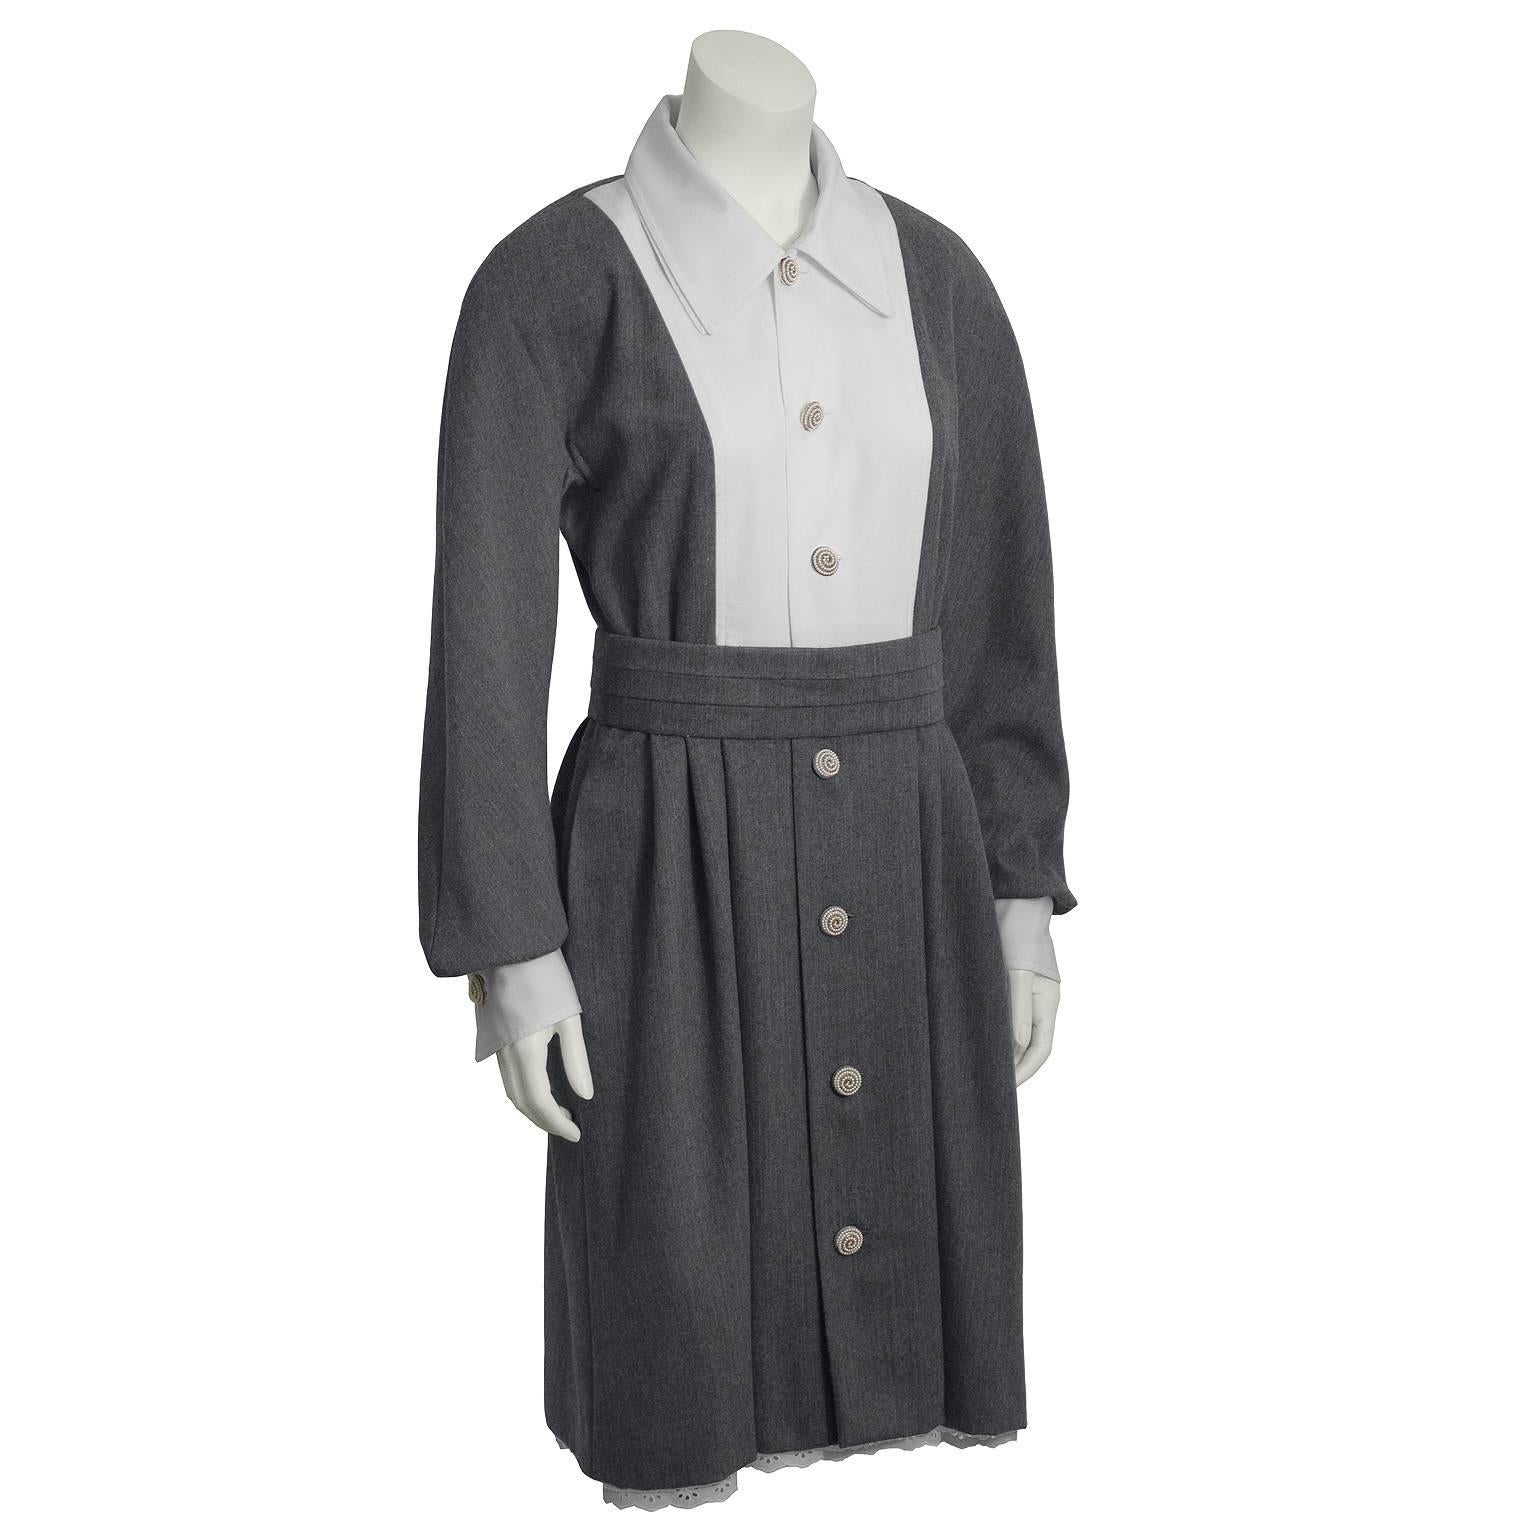 Both modest and adorable, this long sleeve grey wool dress with a white bib and matching underslip dates from the 1960s. Features white collar, loose fitting grey sleeves with white cuffs underneath. Belted at the waist. Skirt is softly pleated and